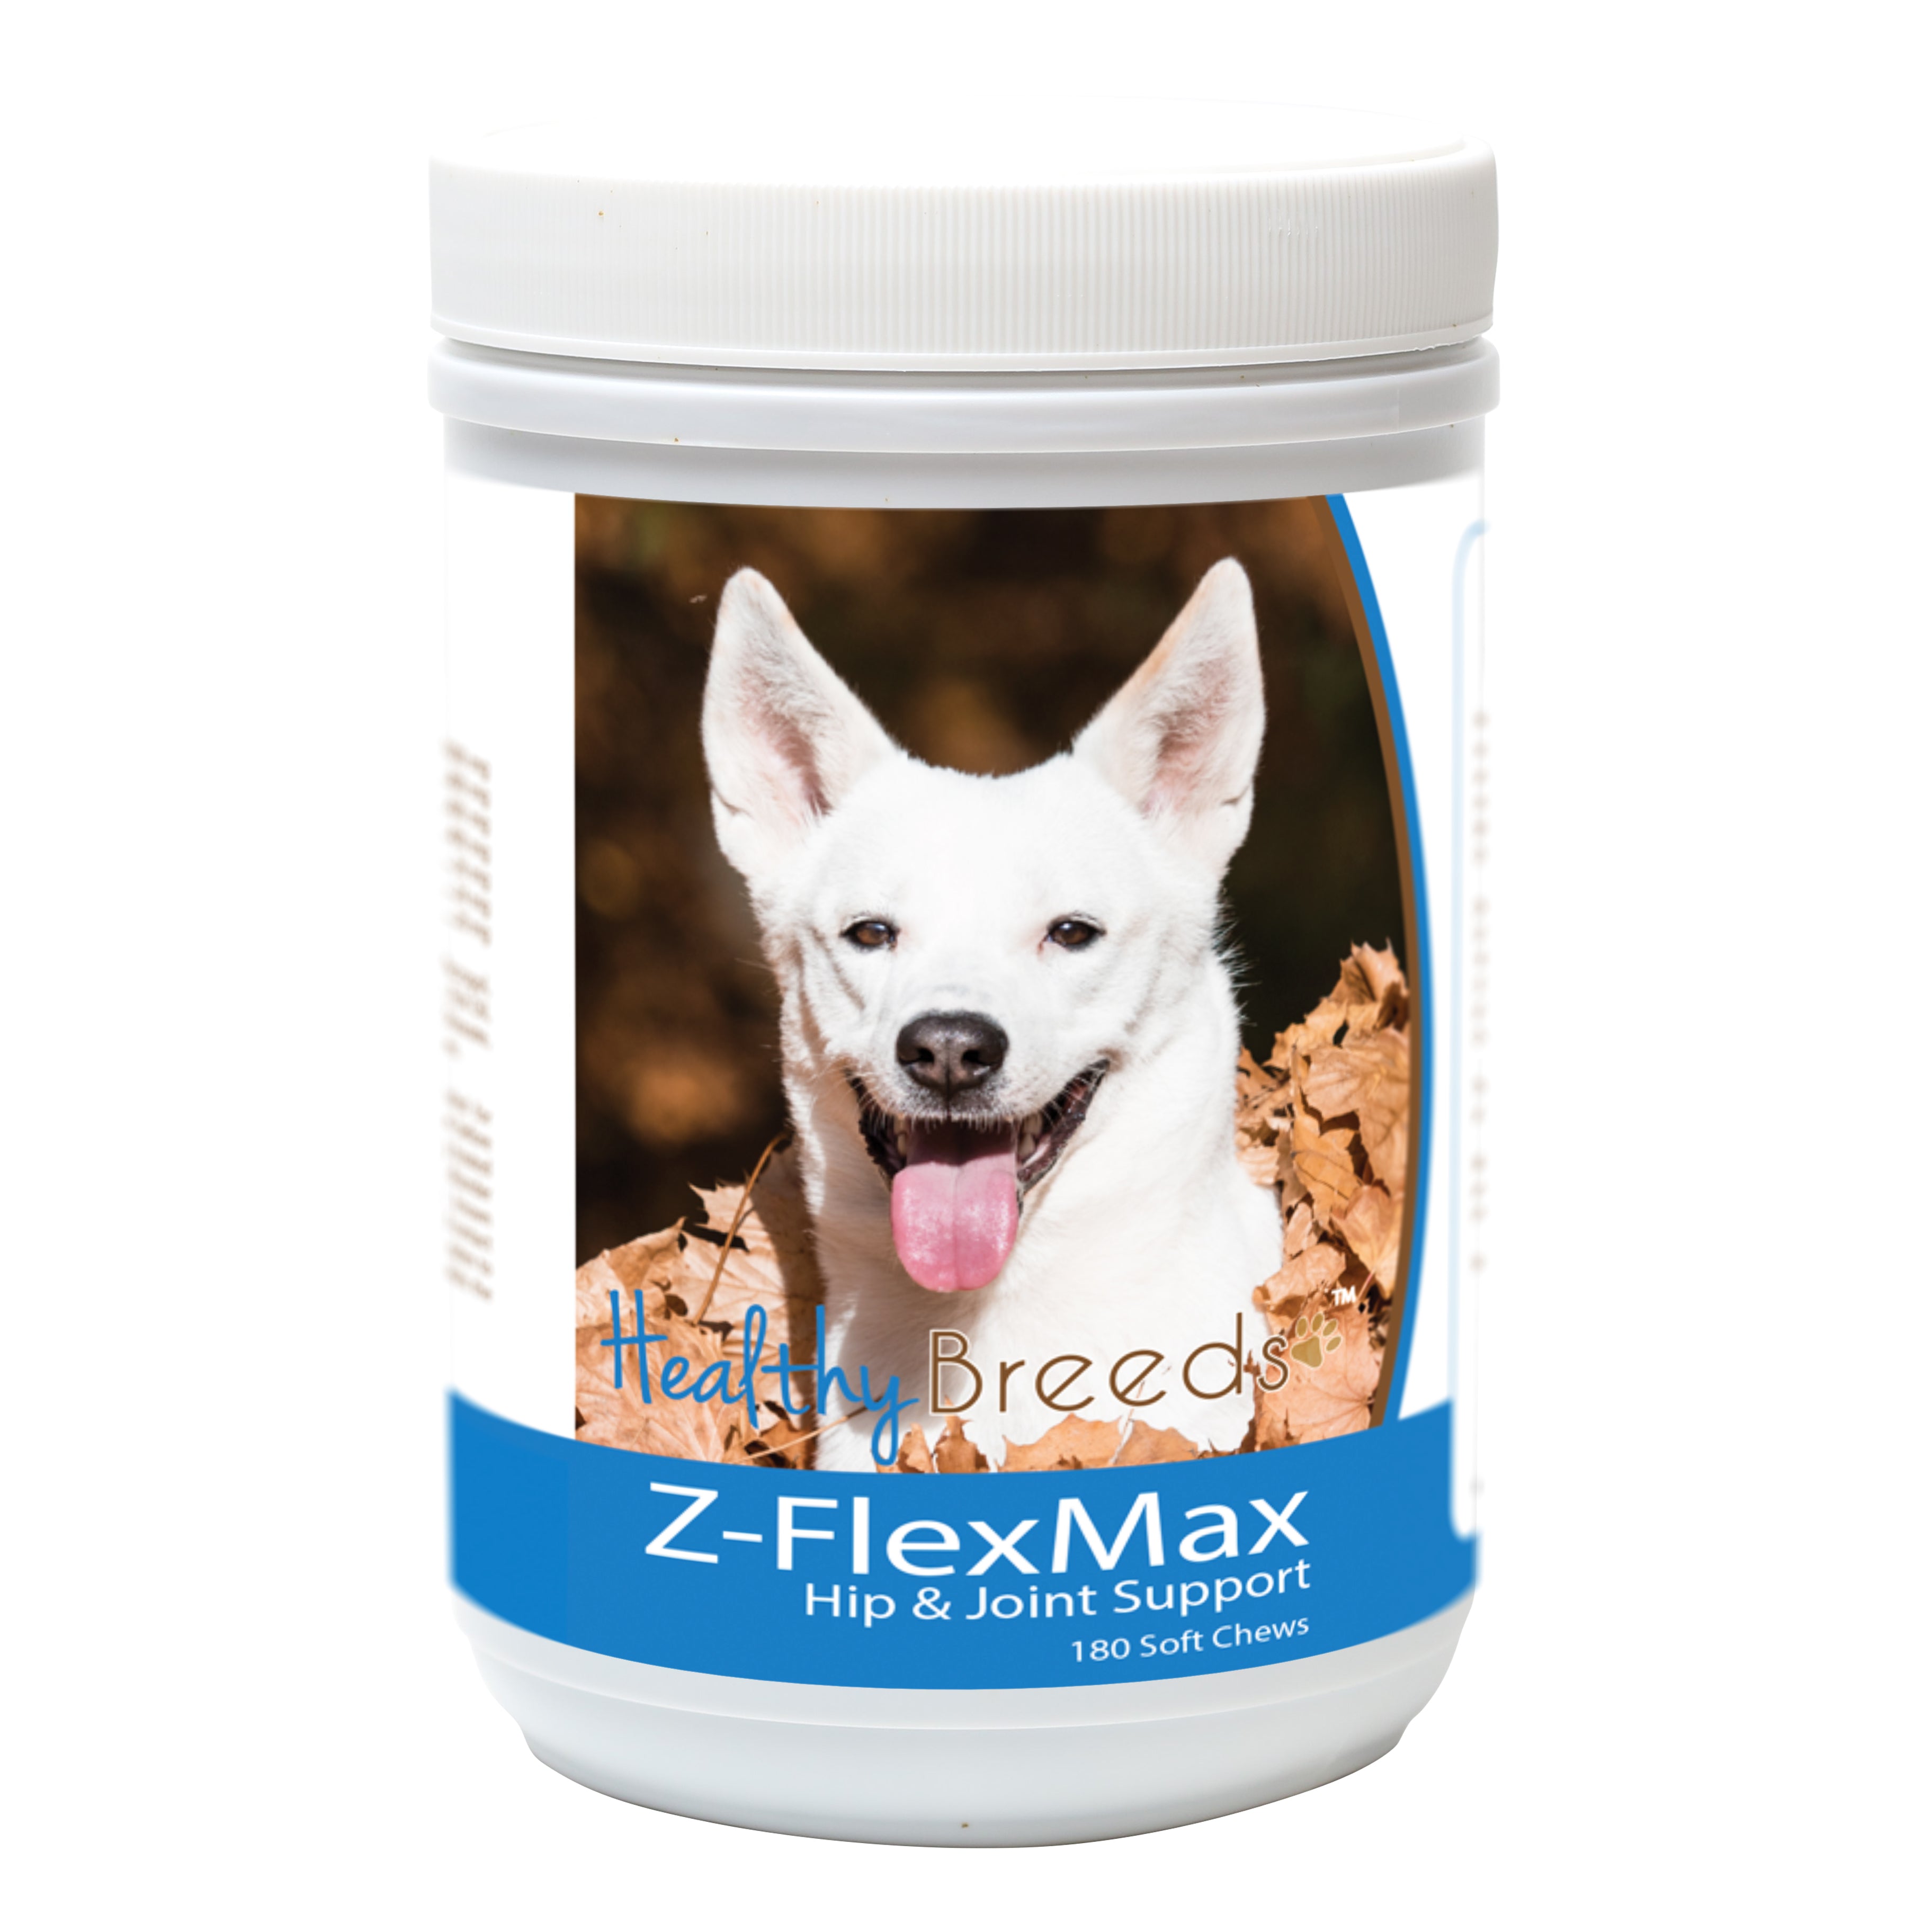 Canaan Dog Z-Flex Max Dog Hip and Joint Support 180 Count